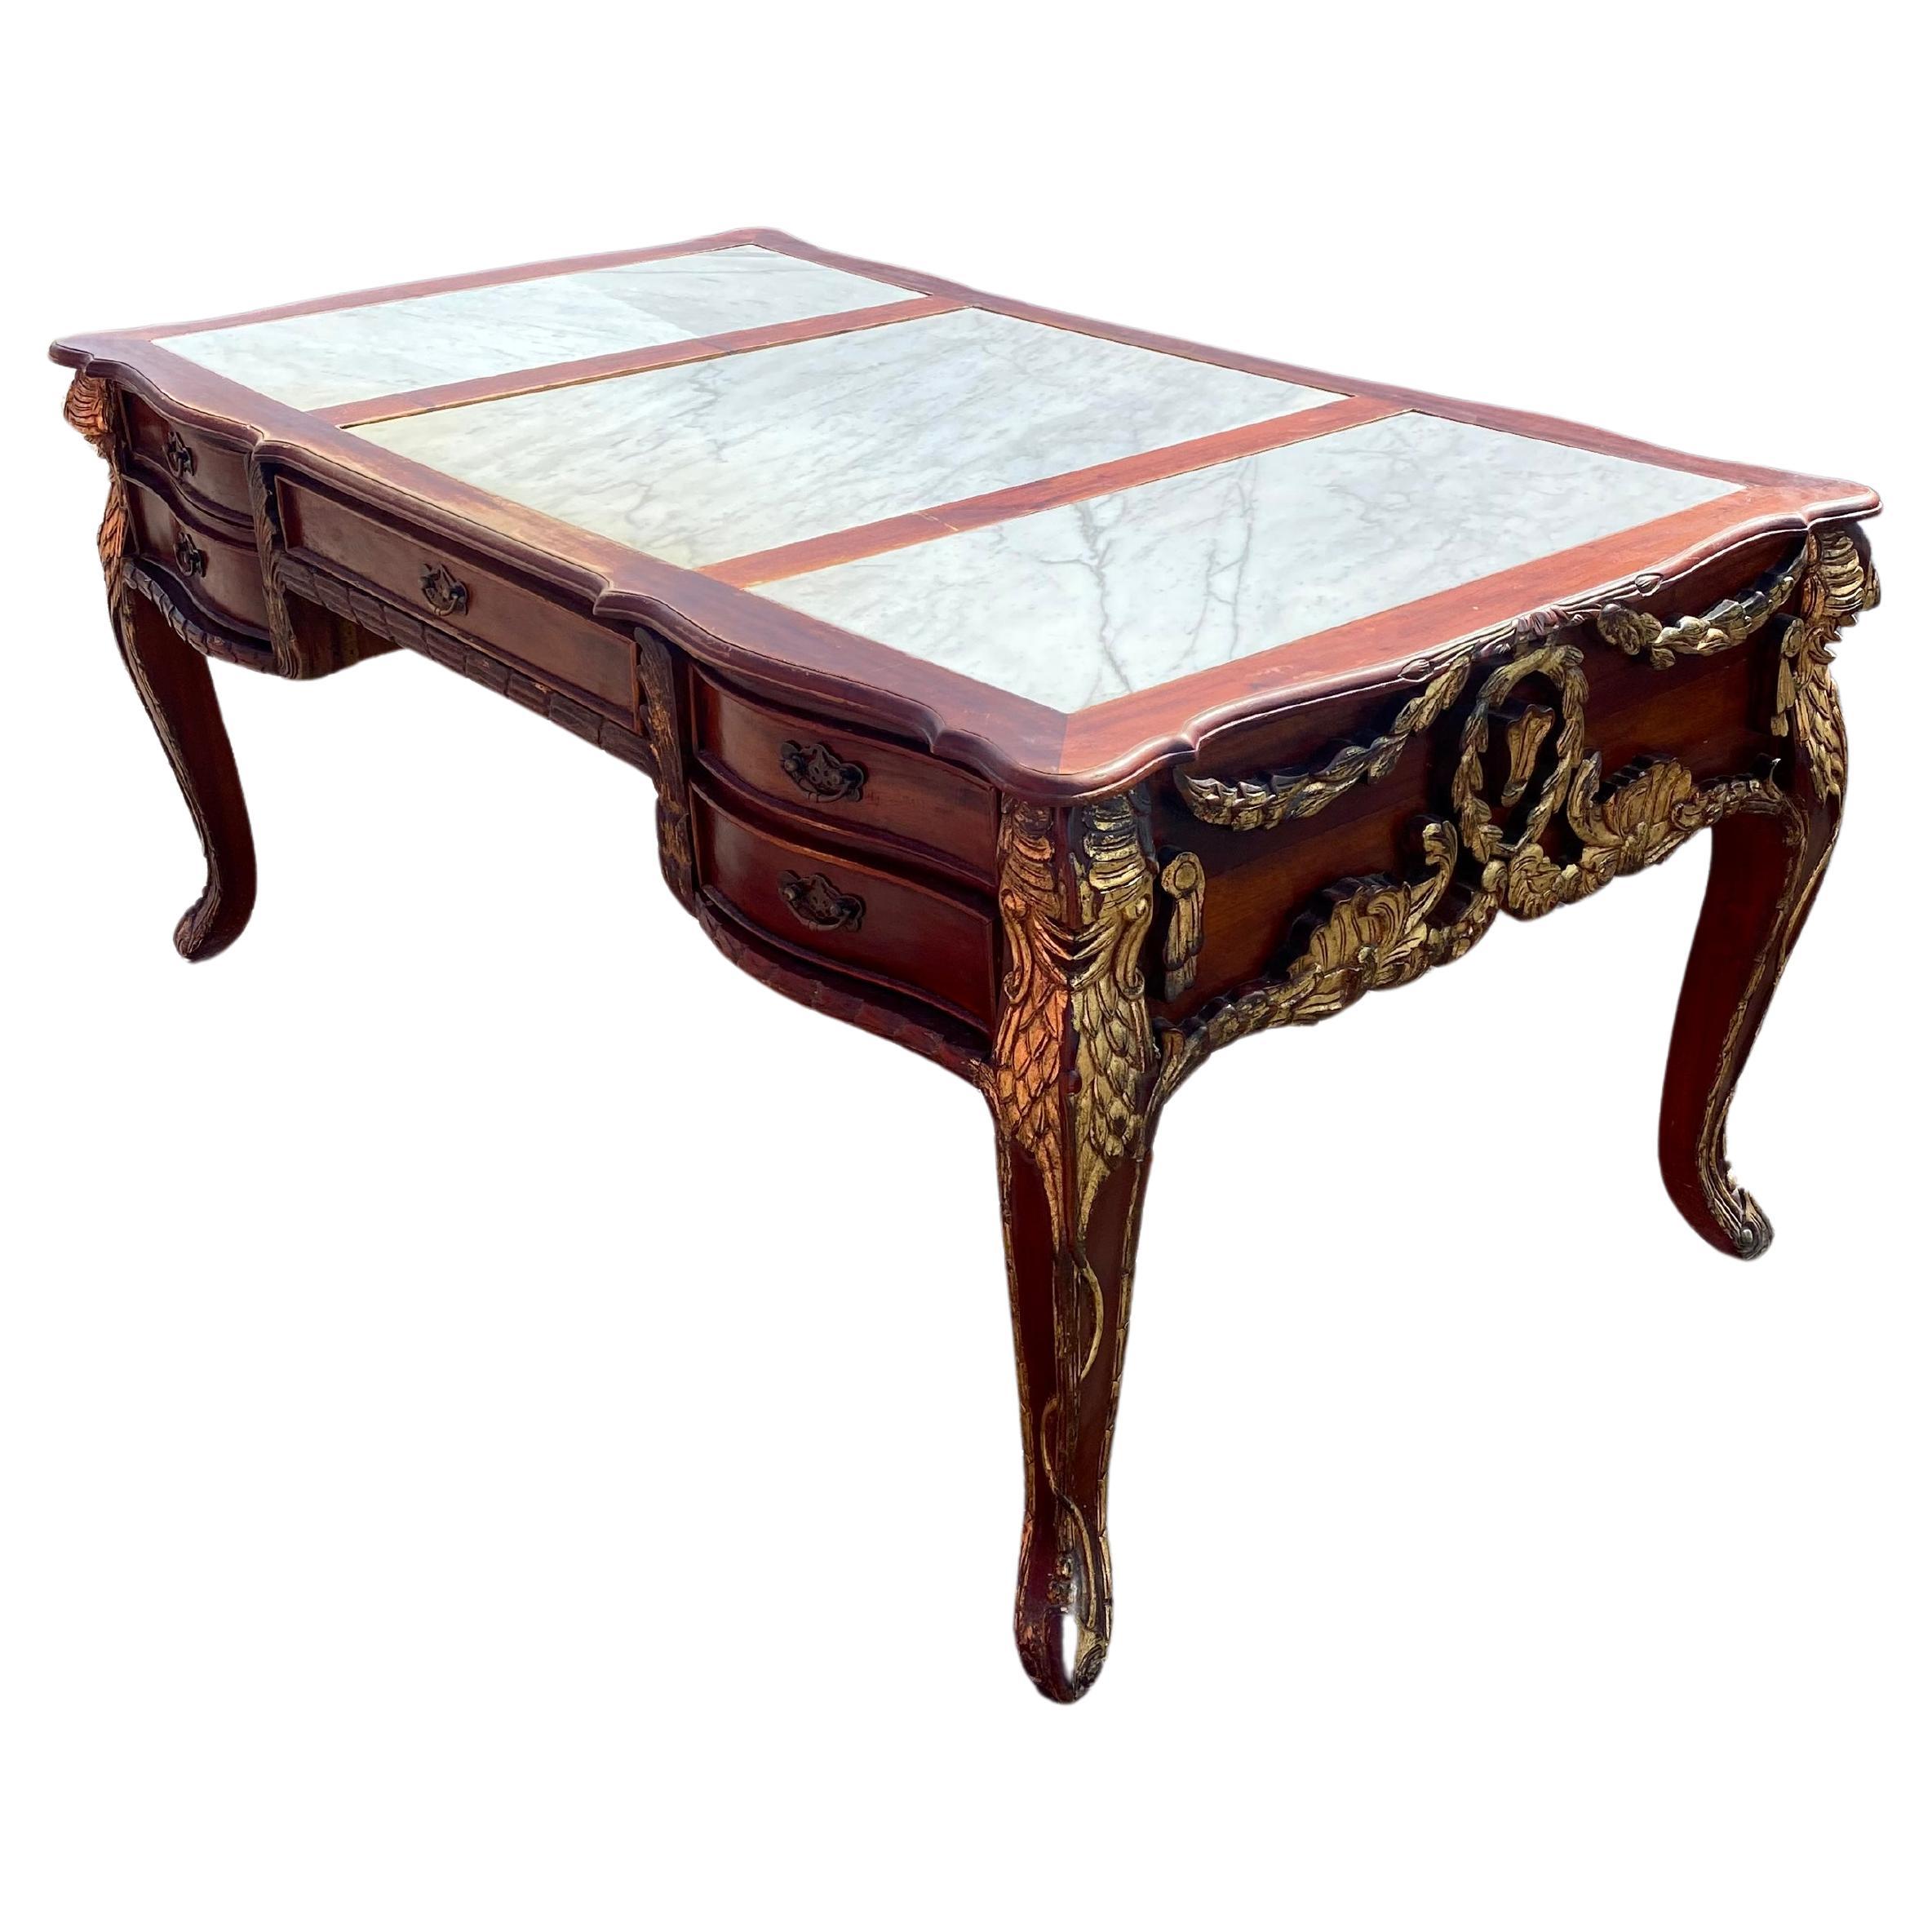 19th Century Louis XV Monumental Solid Carved Gilt Wood Marble Desk For Sale